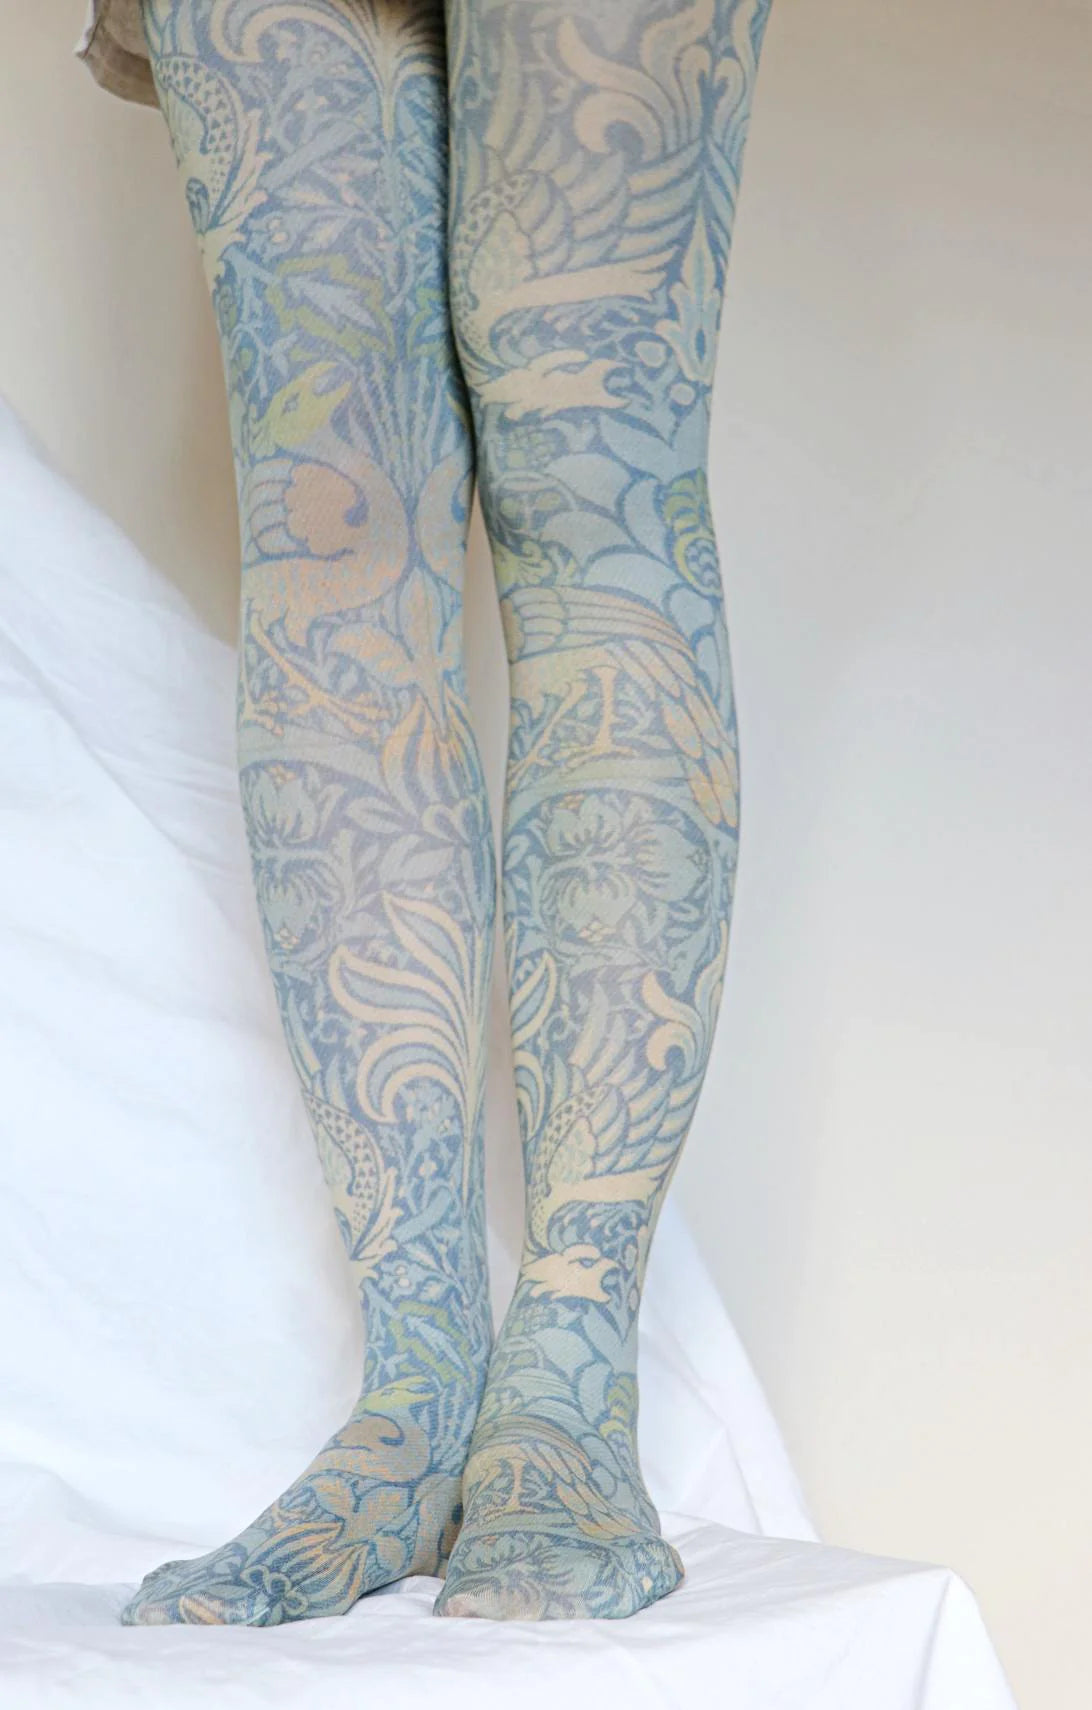 Paisley Chic Patterned Tights for Women -  New Zealand